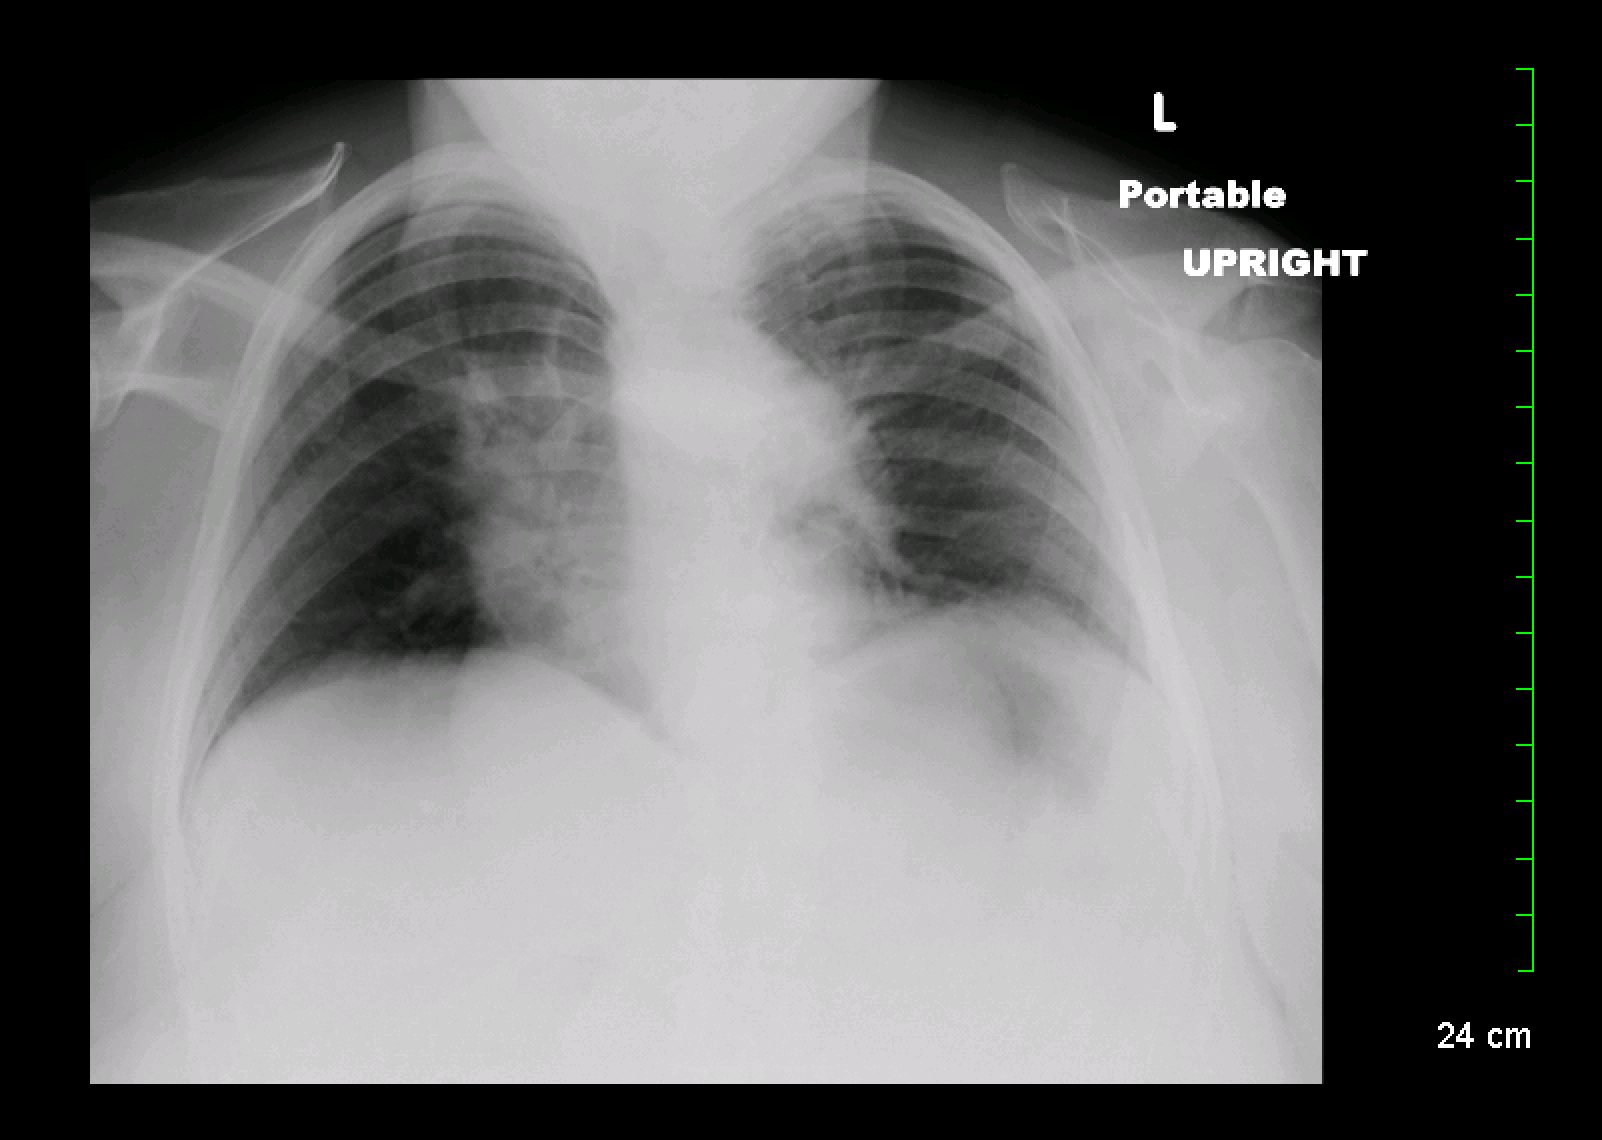 Angulation in this chest X-ray (appearance of ribs and clavicle show a patient who is "tipped back") makes it more difficult to interpret. 